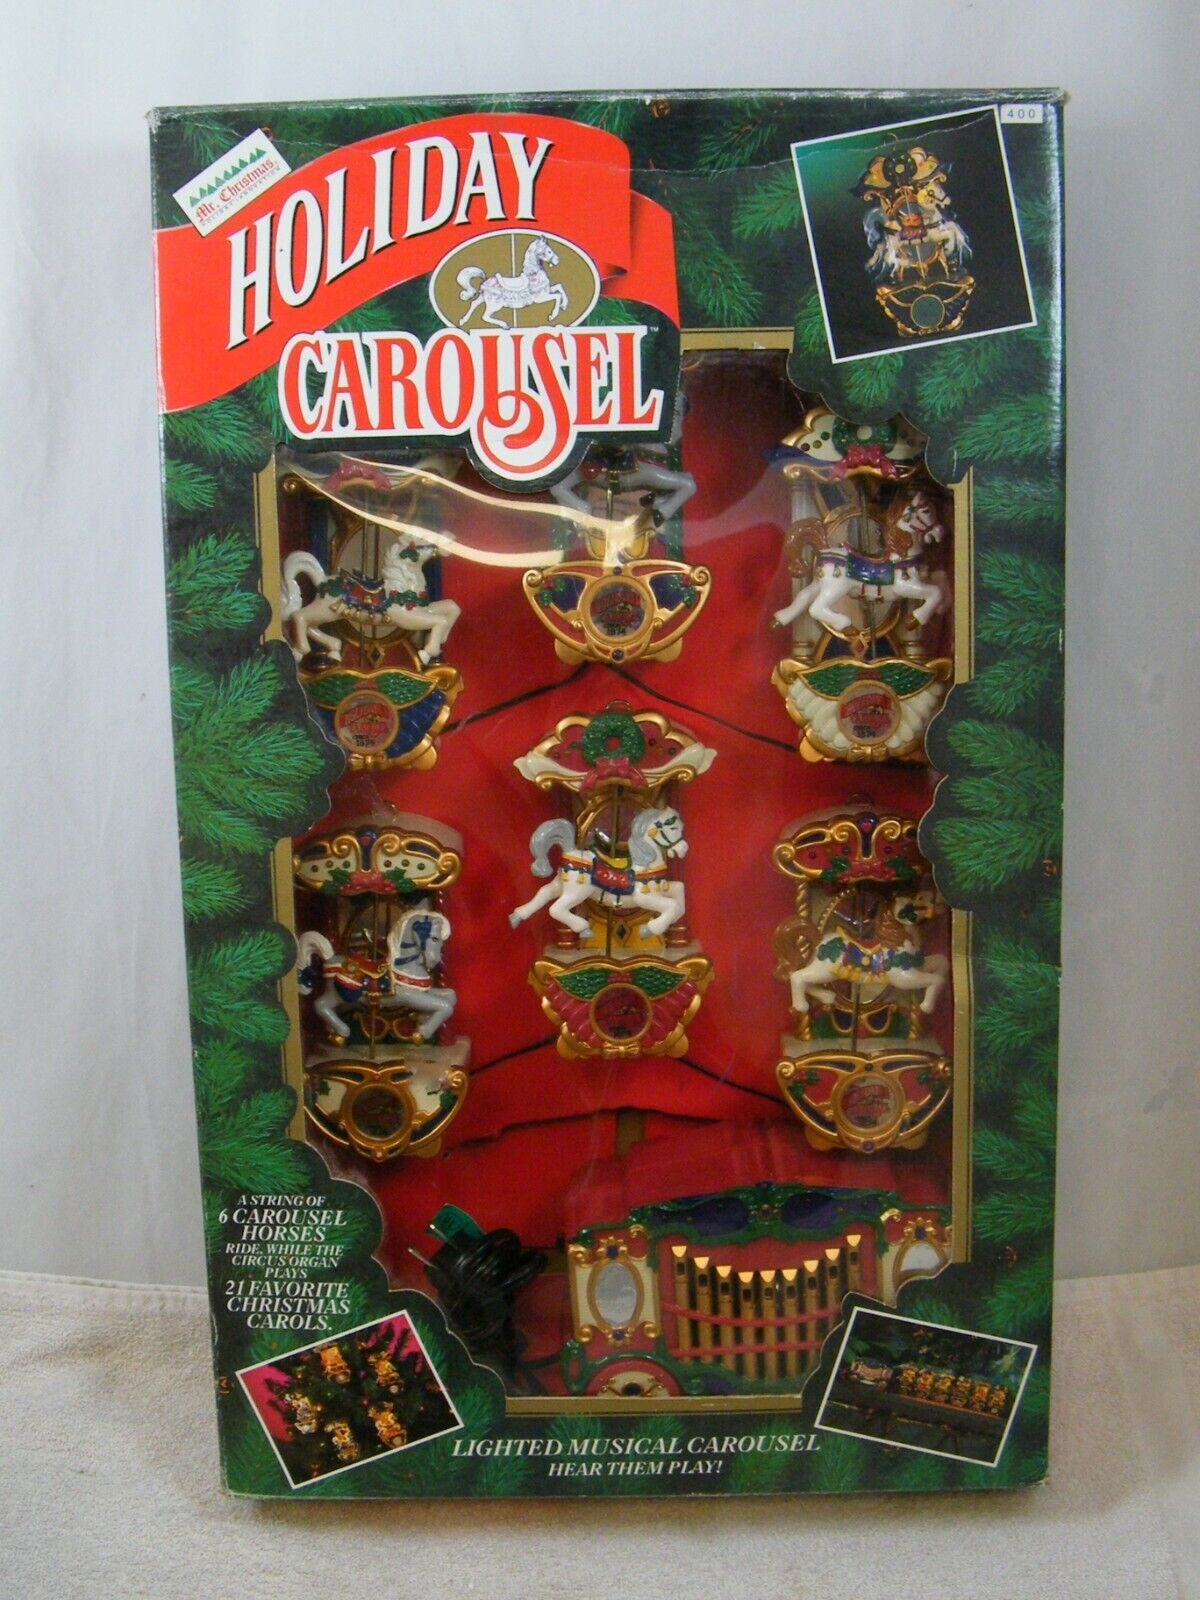 VINTAGE 1992 MR CHRISTMAS HOLIDAY CAROUSEL 6 FIGURES, 21 SONGS, LIGHTED, USED